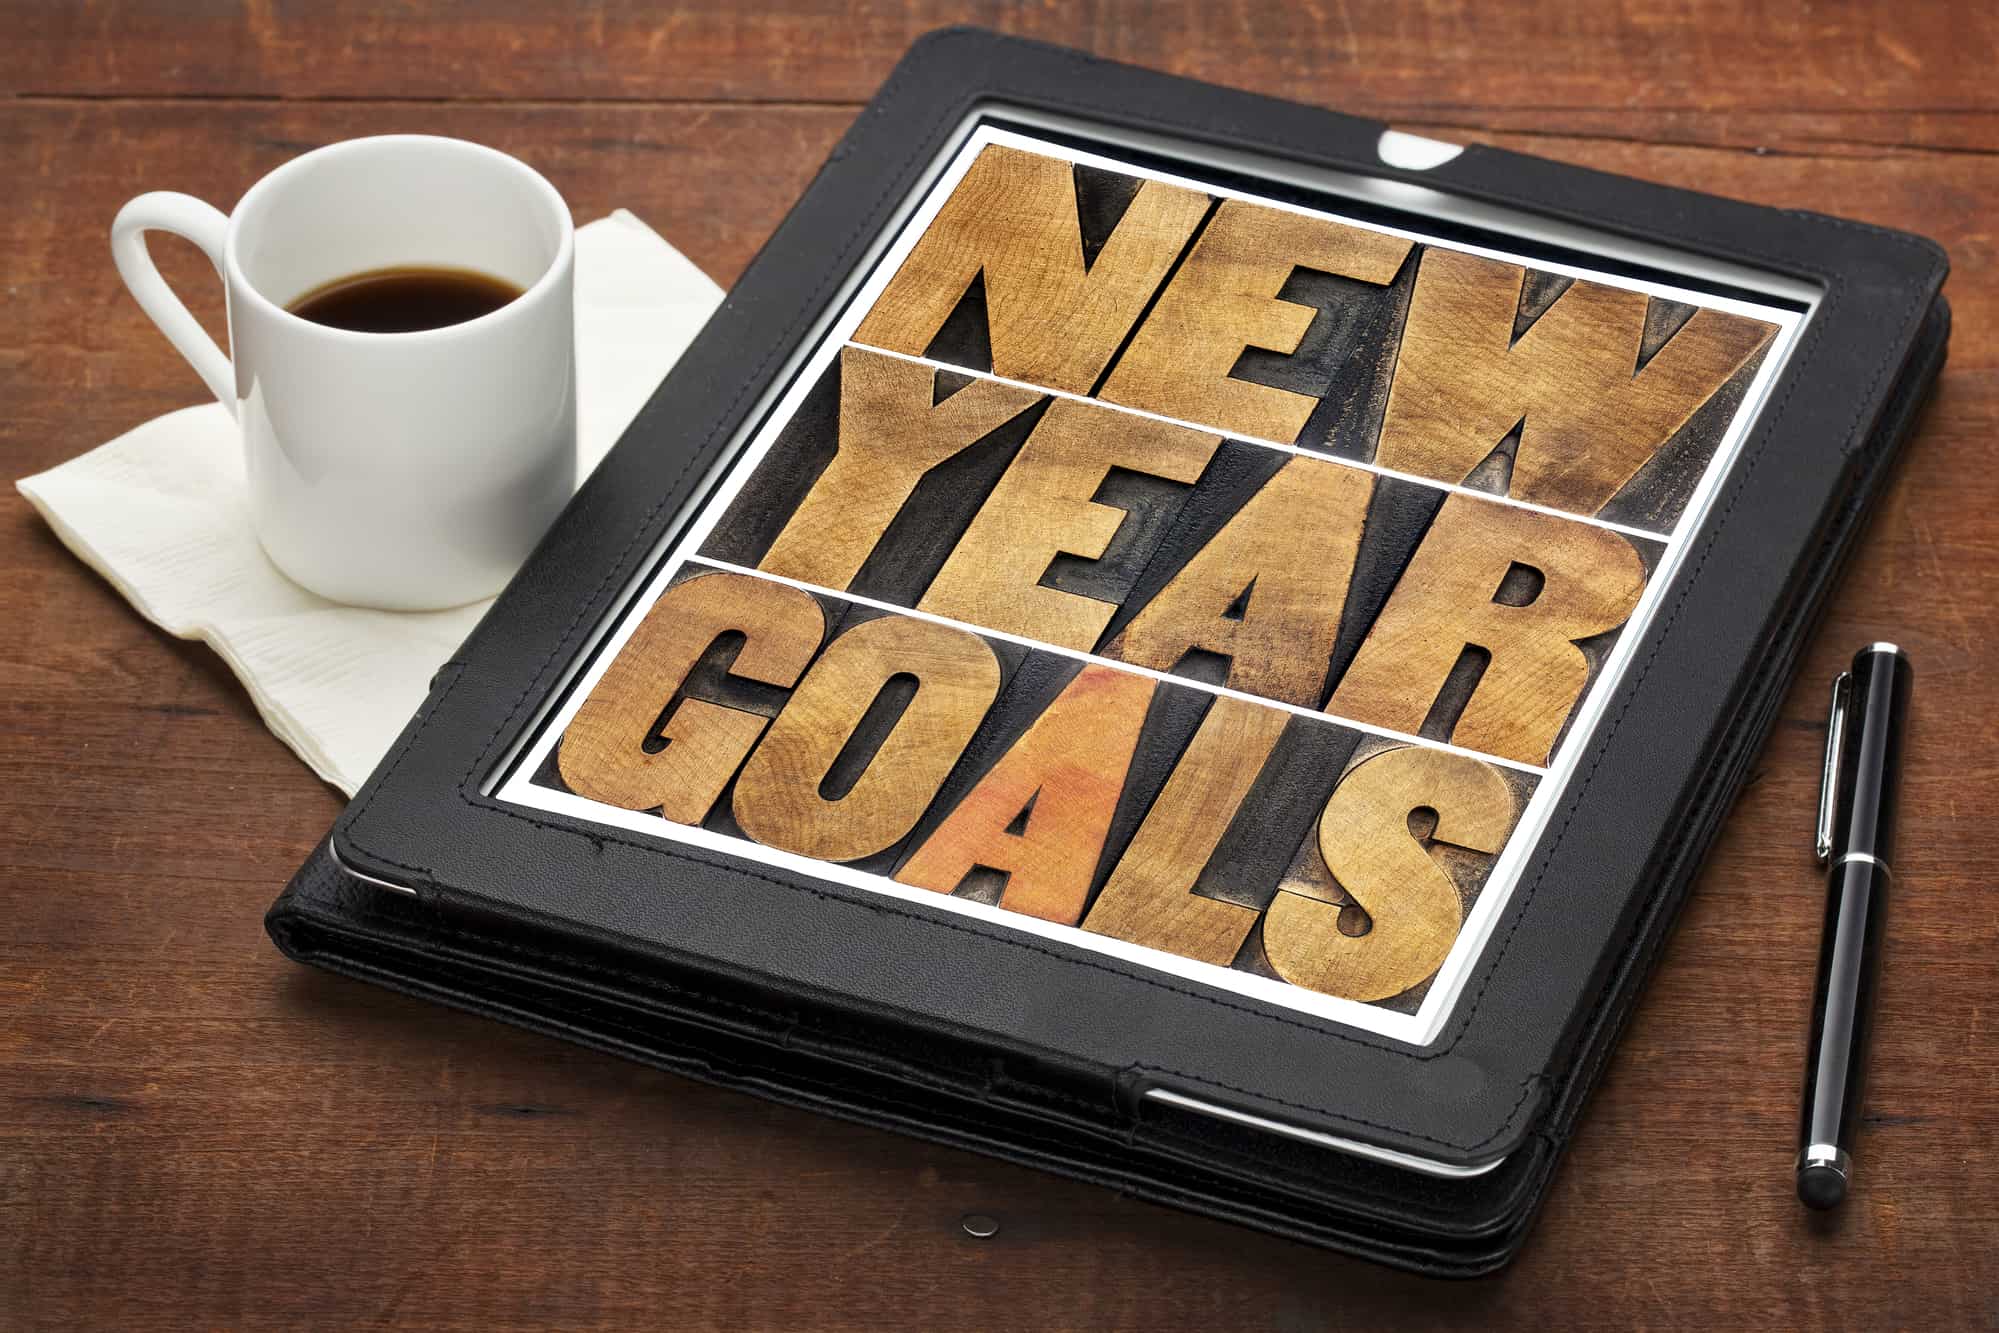 Making new years resolutions for kids is a great way to teach them how to work toward goals